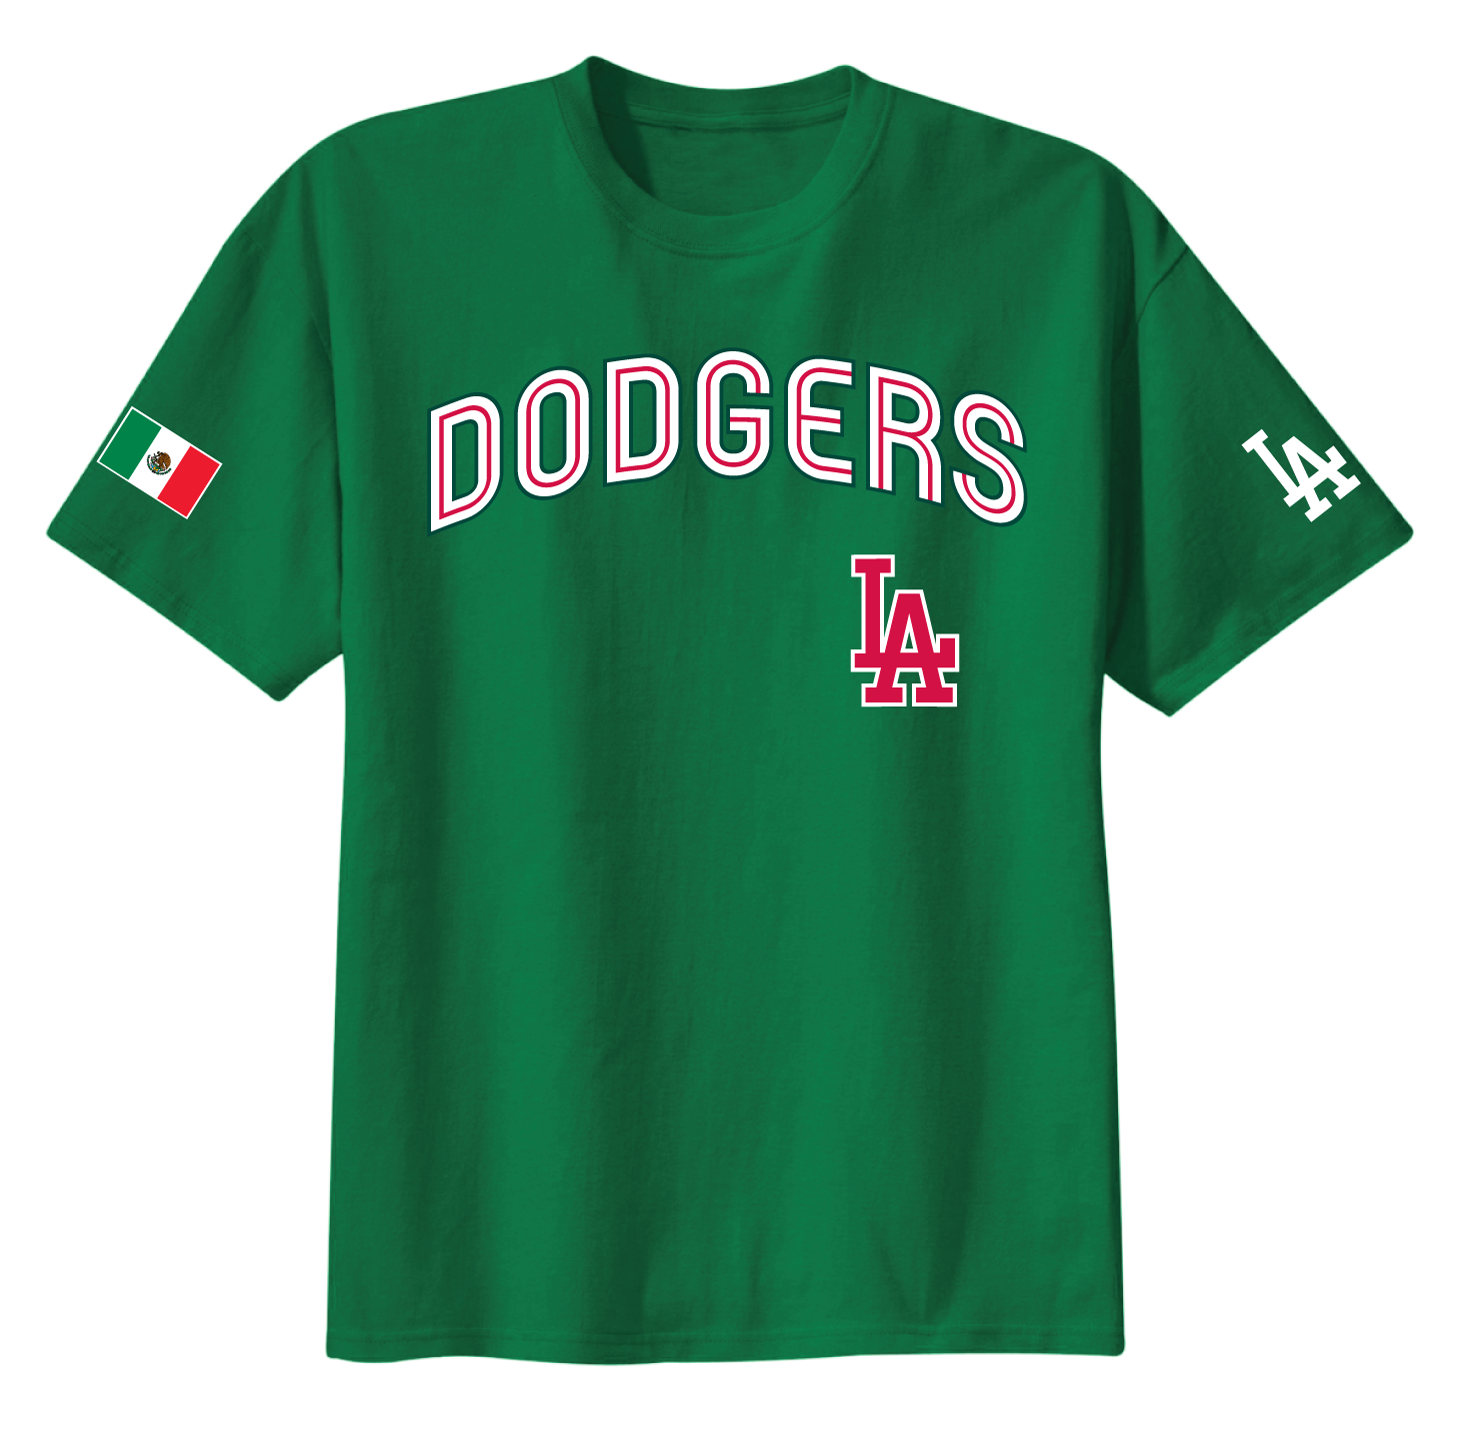 mexico dodgers jersey